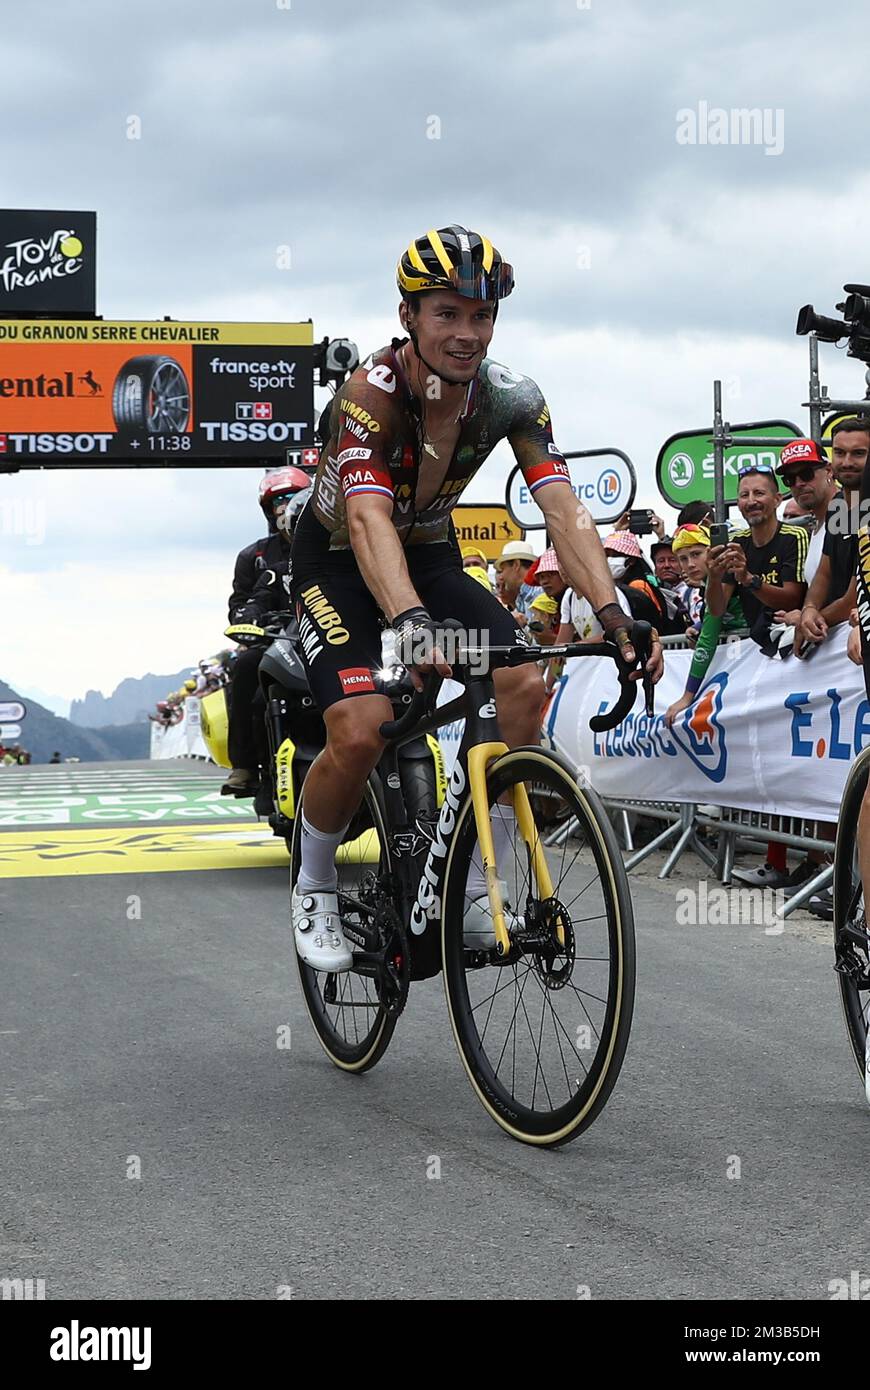 Slovenian Primoz Roglic of Jumbo-Visma crosses the finish line of stage eleven of the Tour de France cycling race, a 149km race from Albertville to Col du Granon Serre Chevalier, France, on